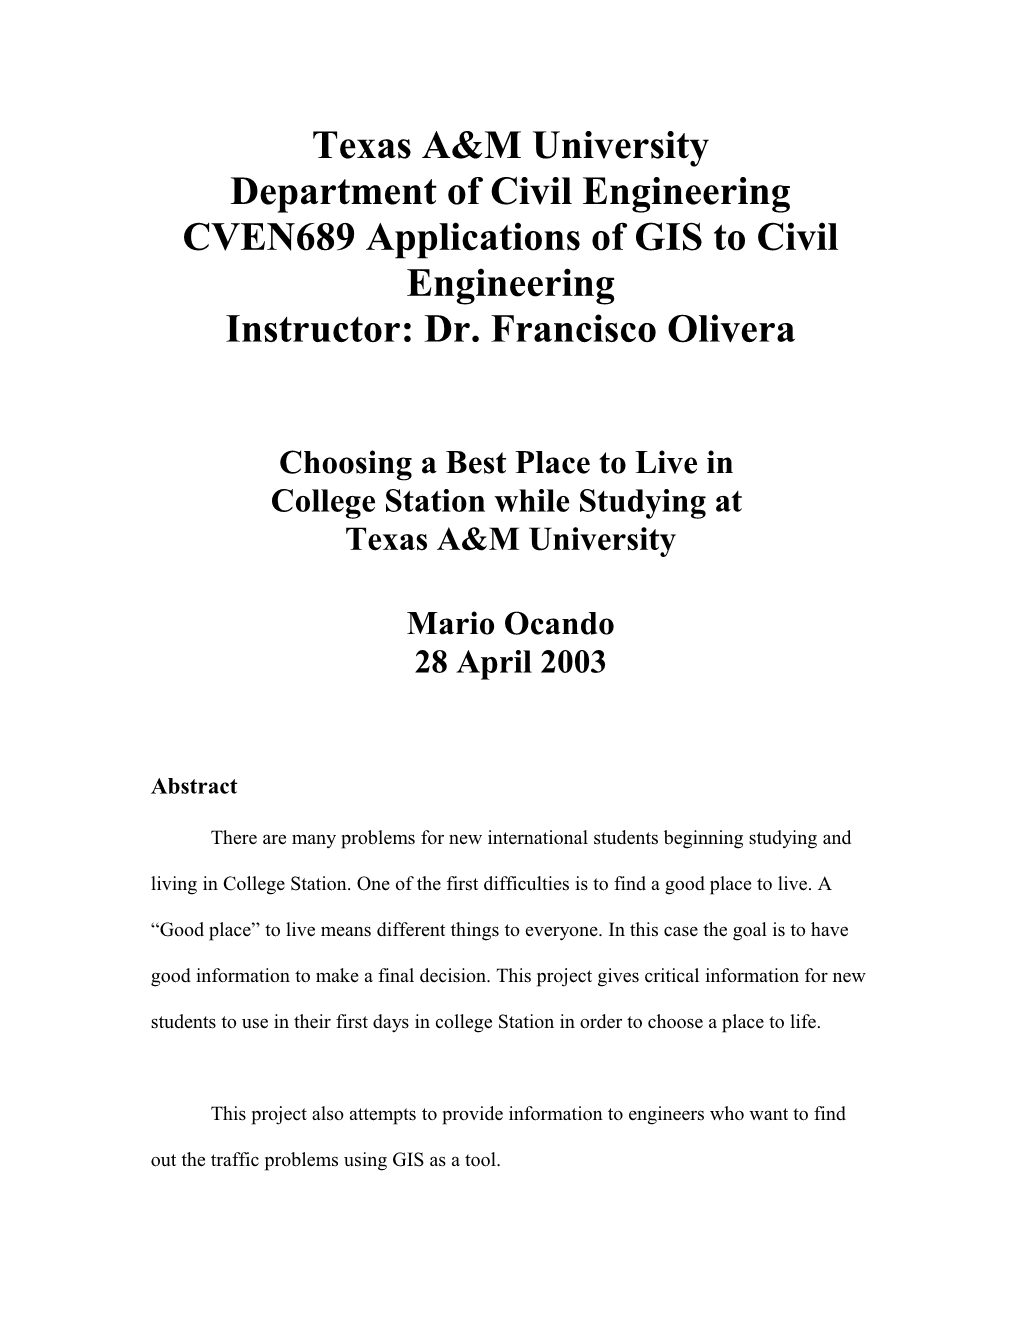 CVEN689 Applications of GIS to Civil Engineering